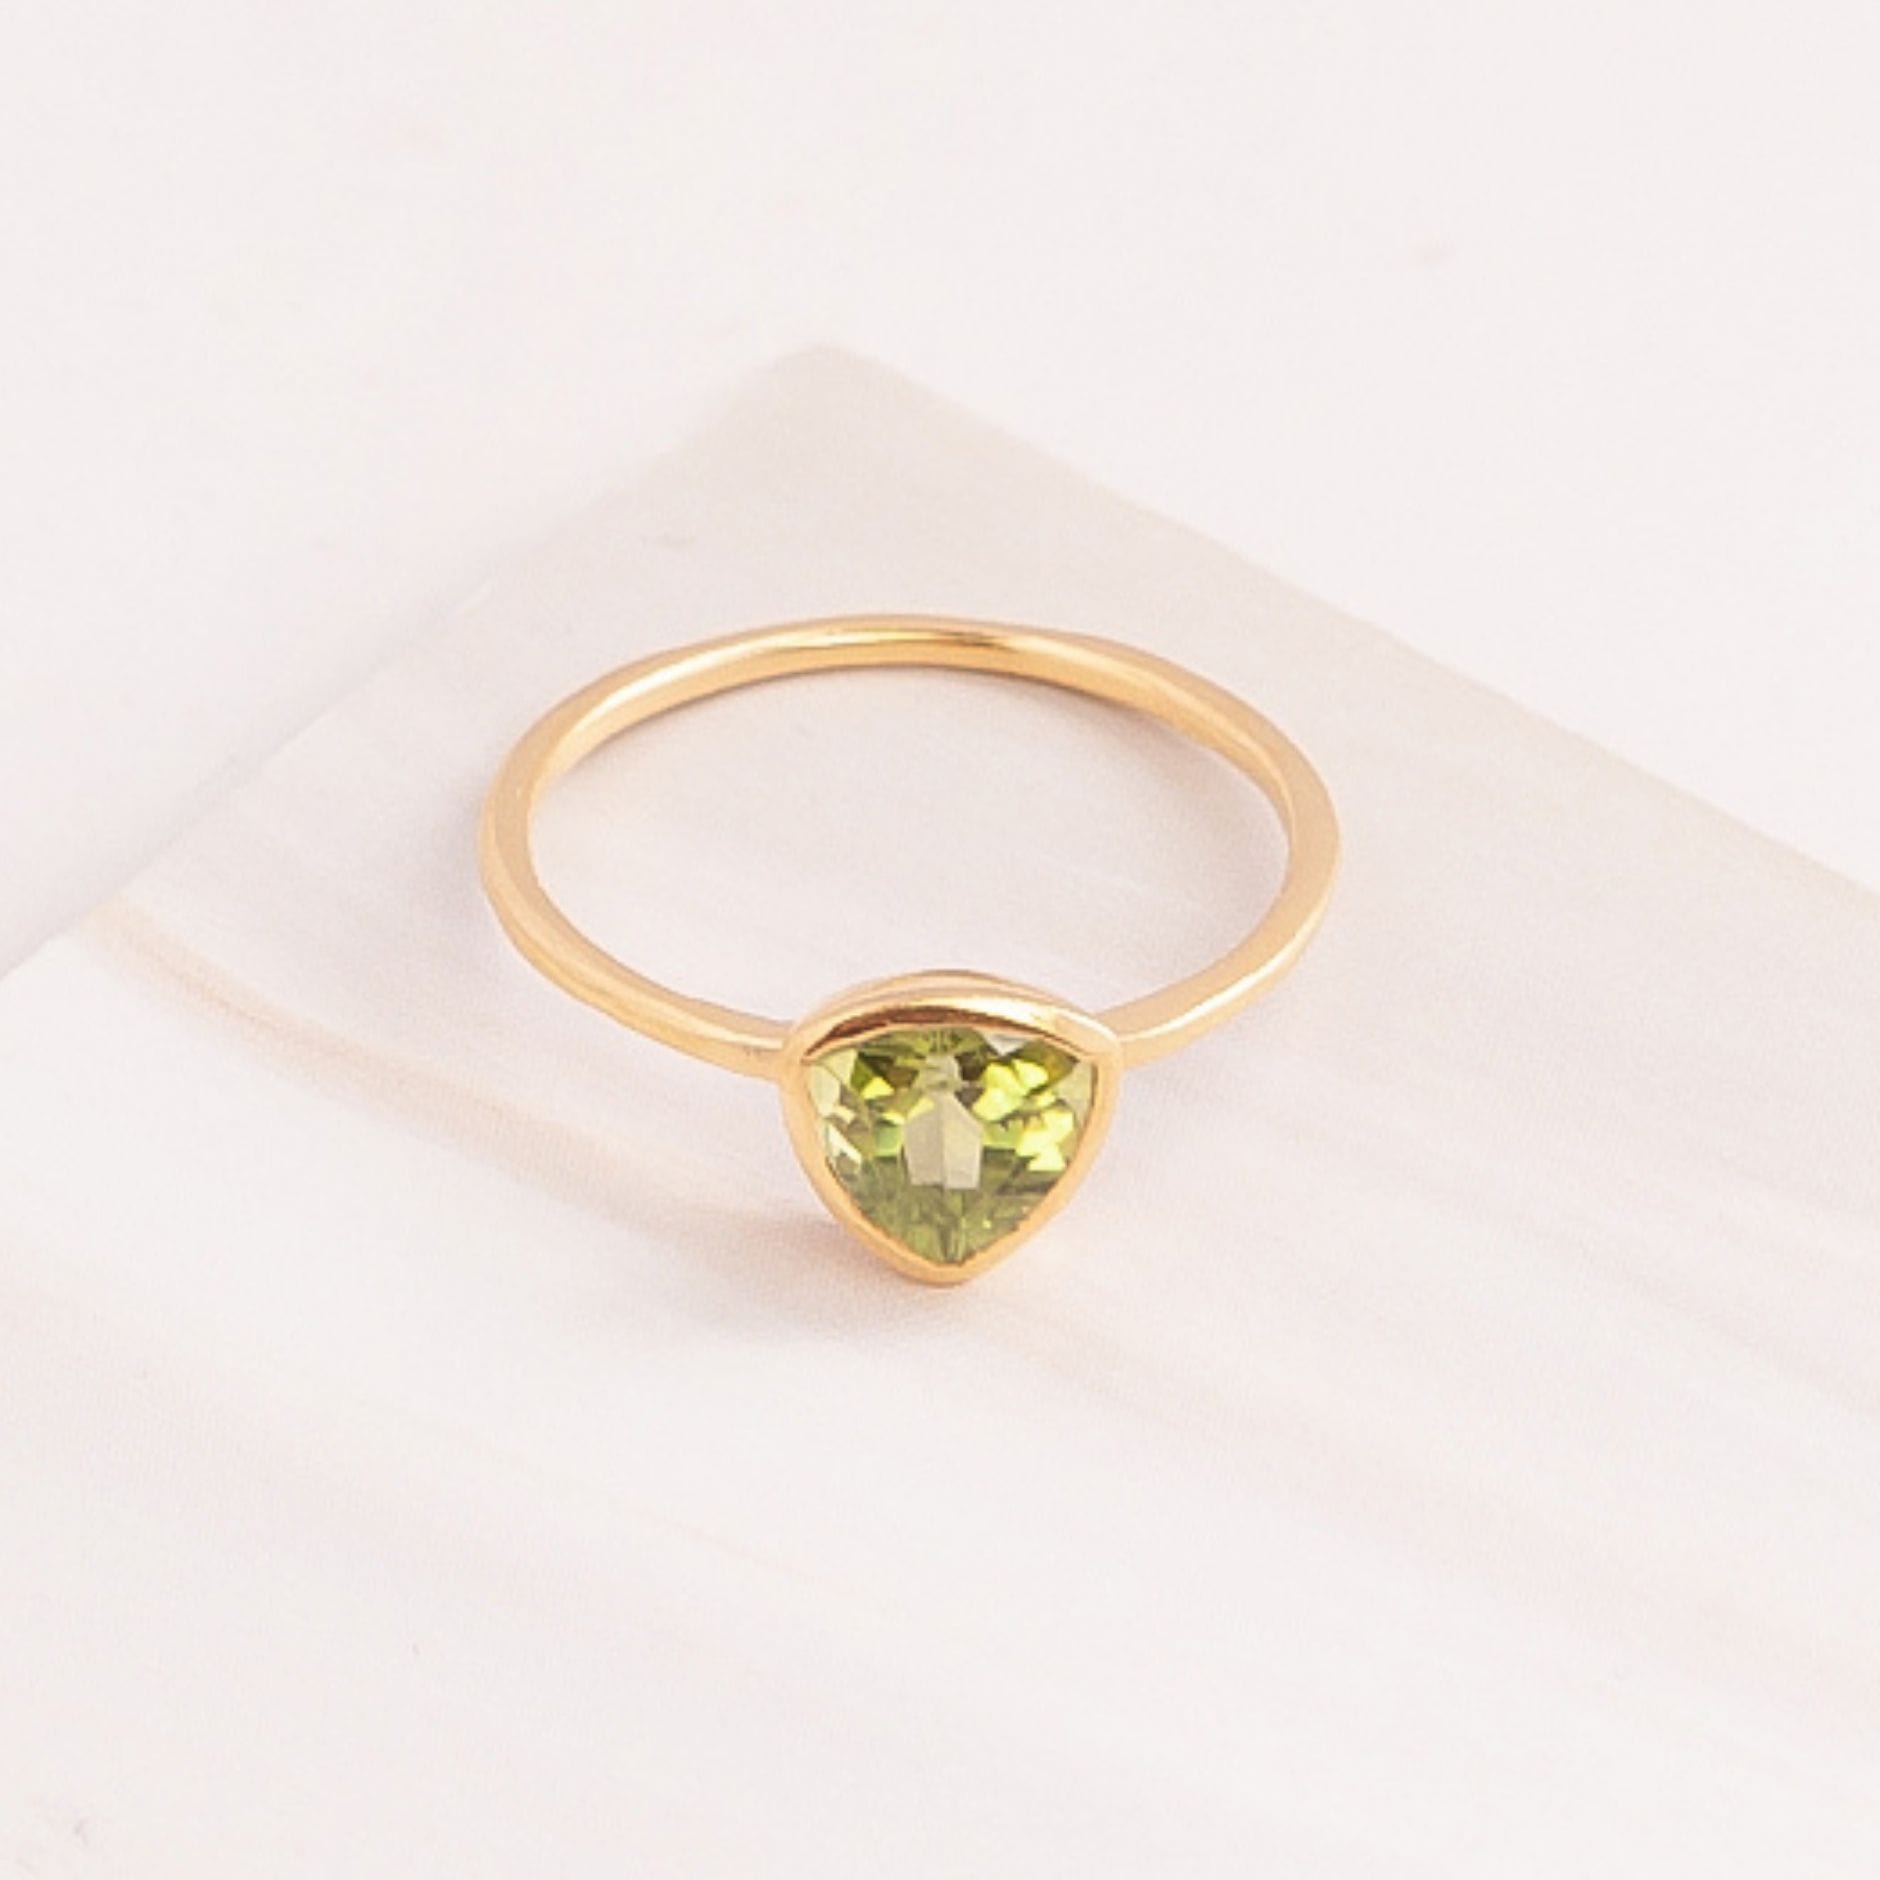 Emblem Jewelry Rings Green Peridot / Triangle Signature Candy Gemstone Stack Rings (Ring Size 4)